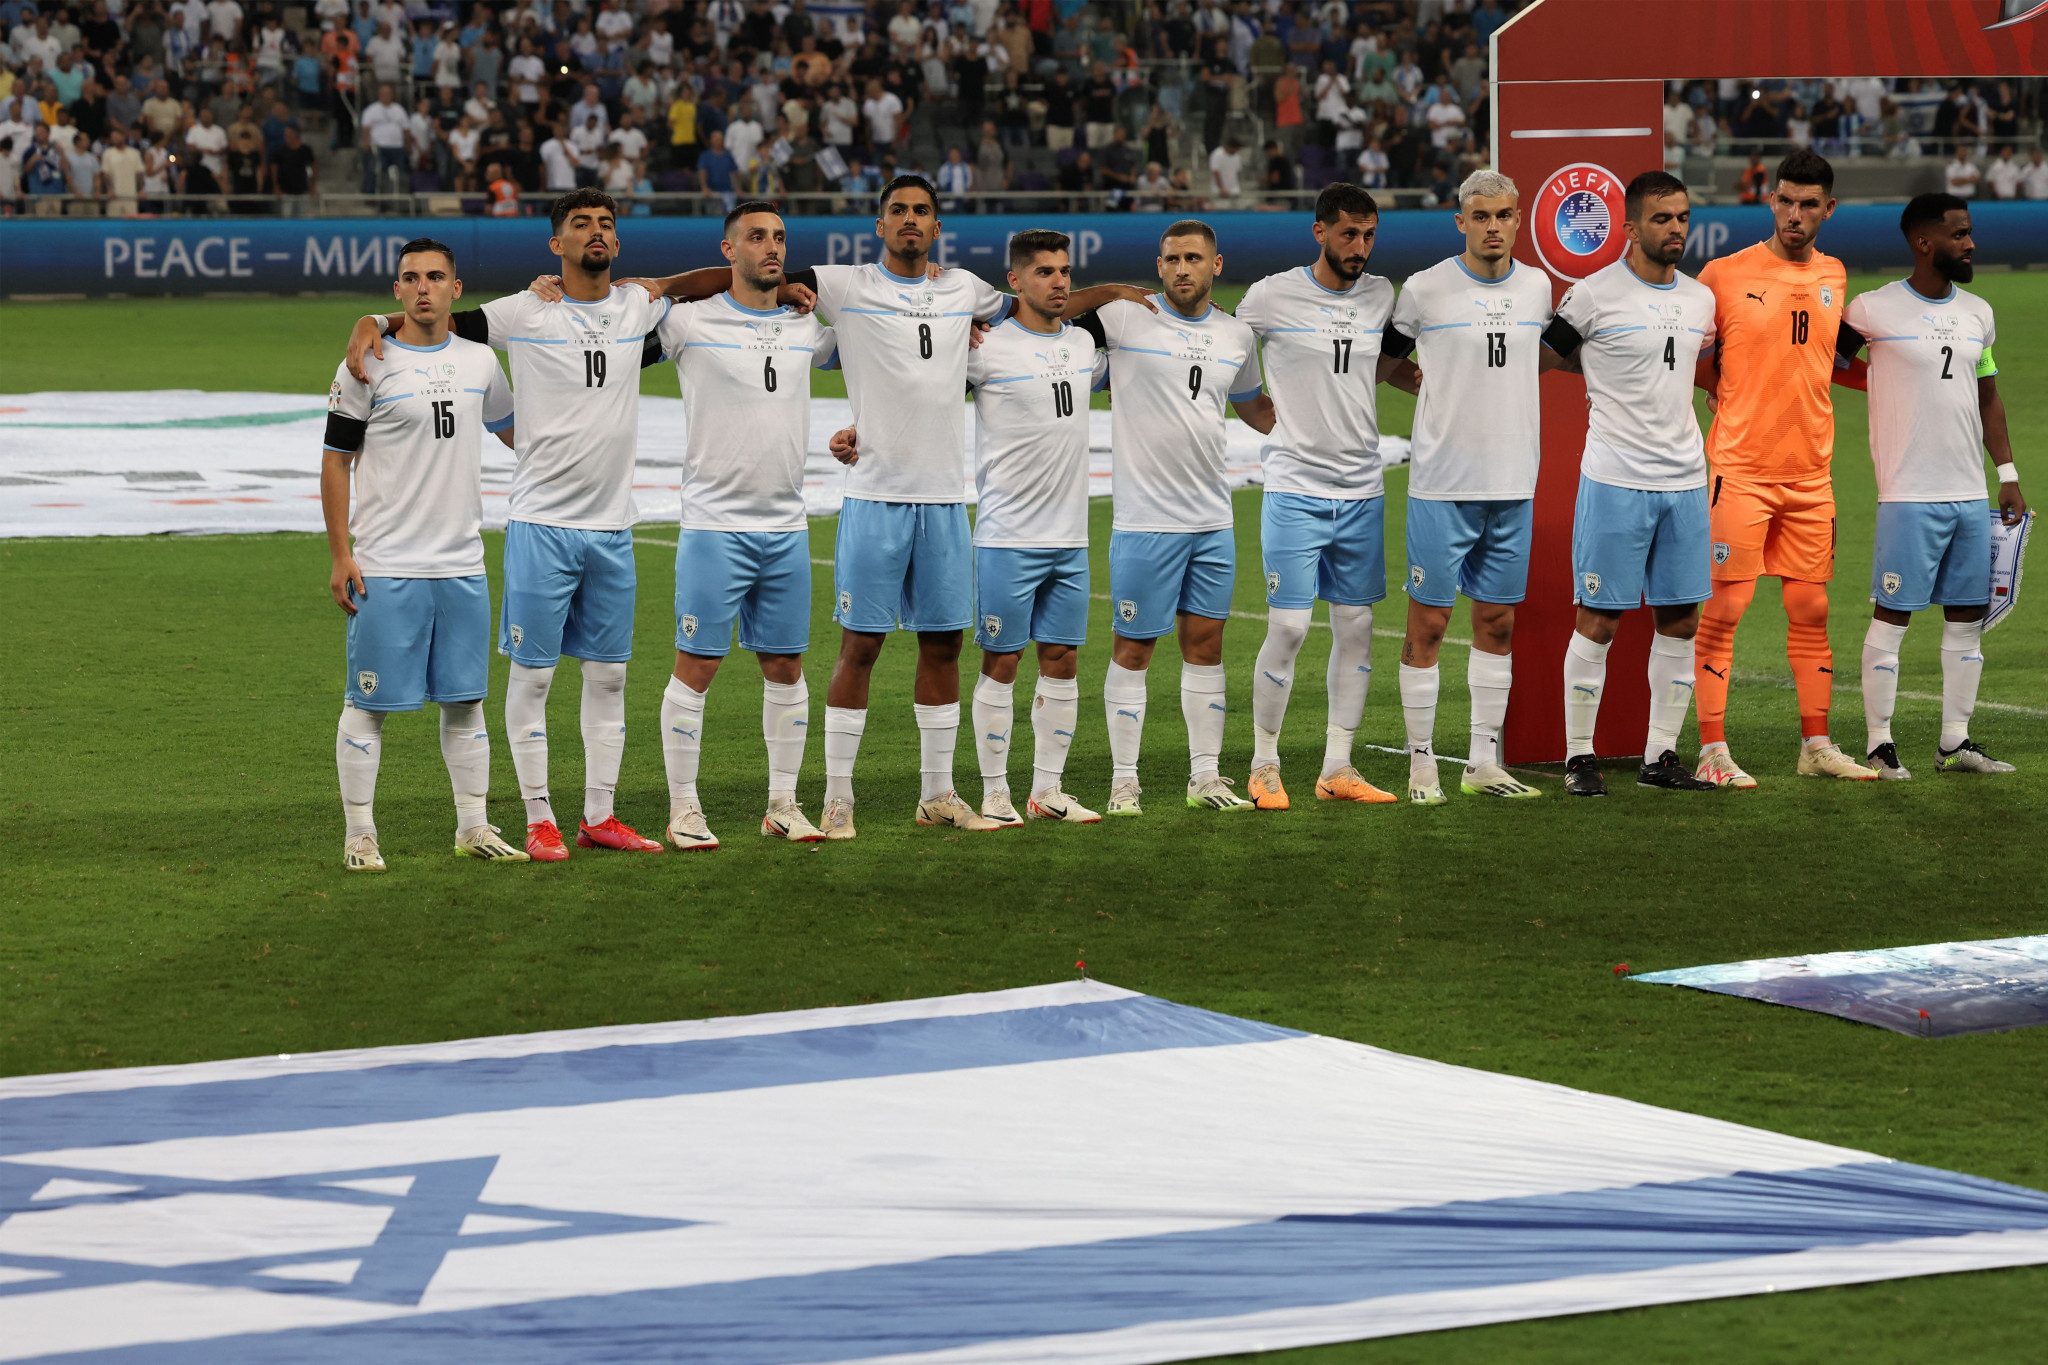 UEFA postpones matches in Israel, including European Championship qualifier, due to Palestine conflict